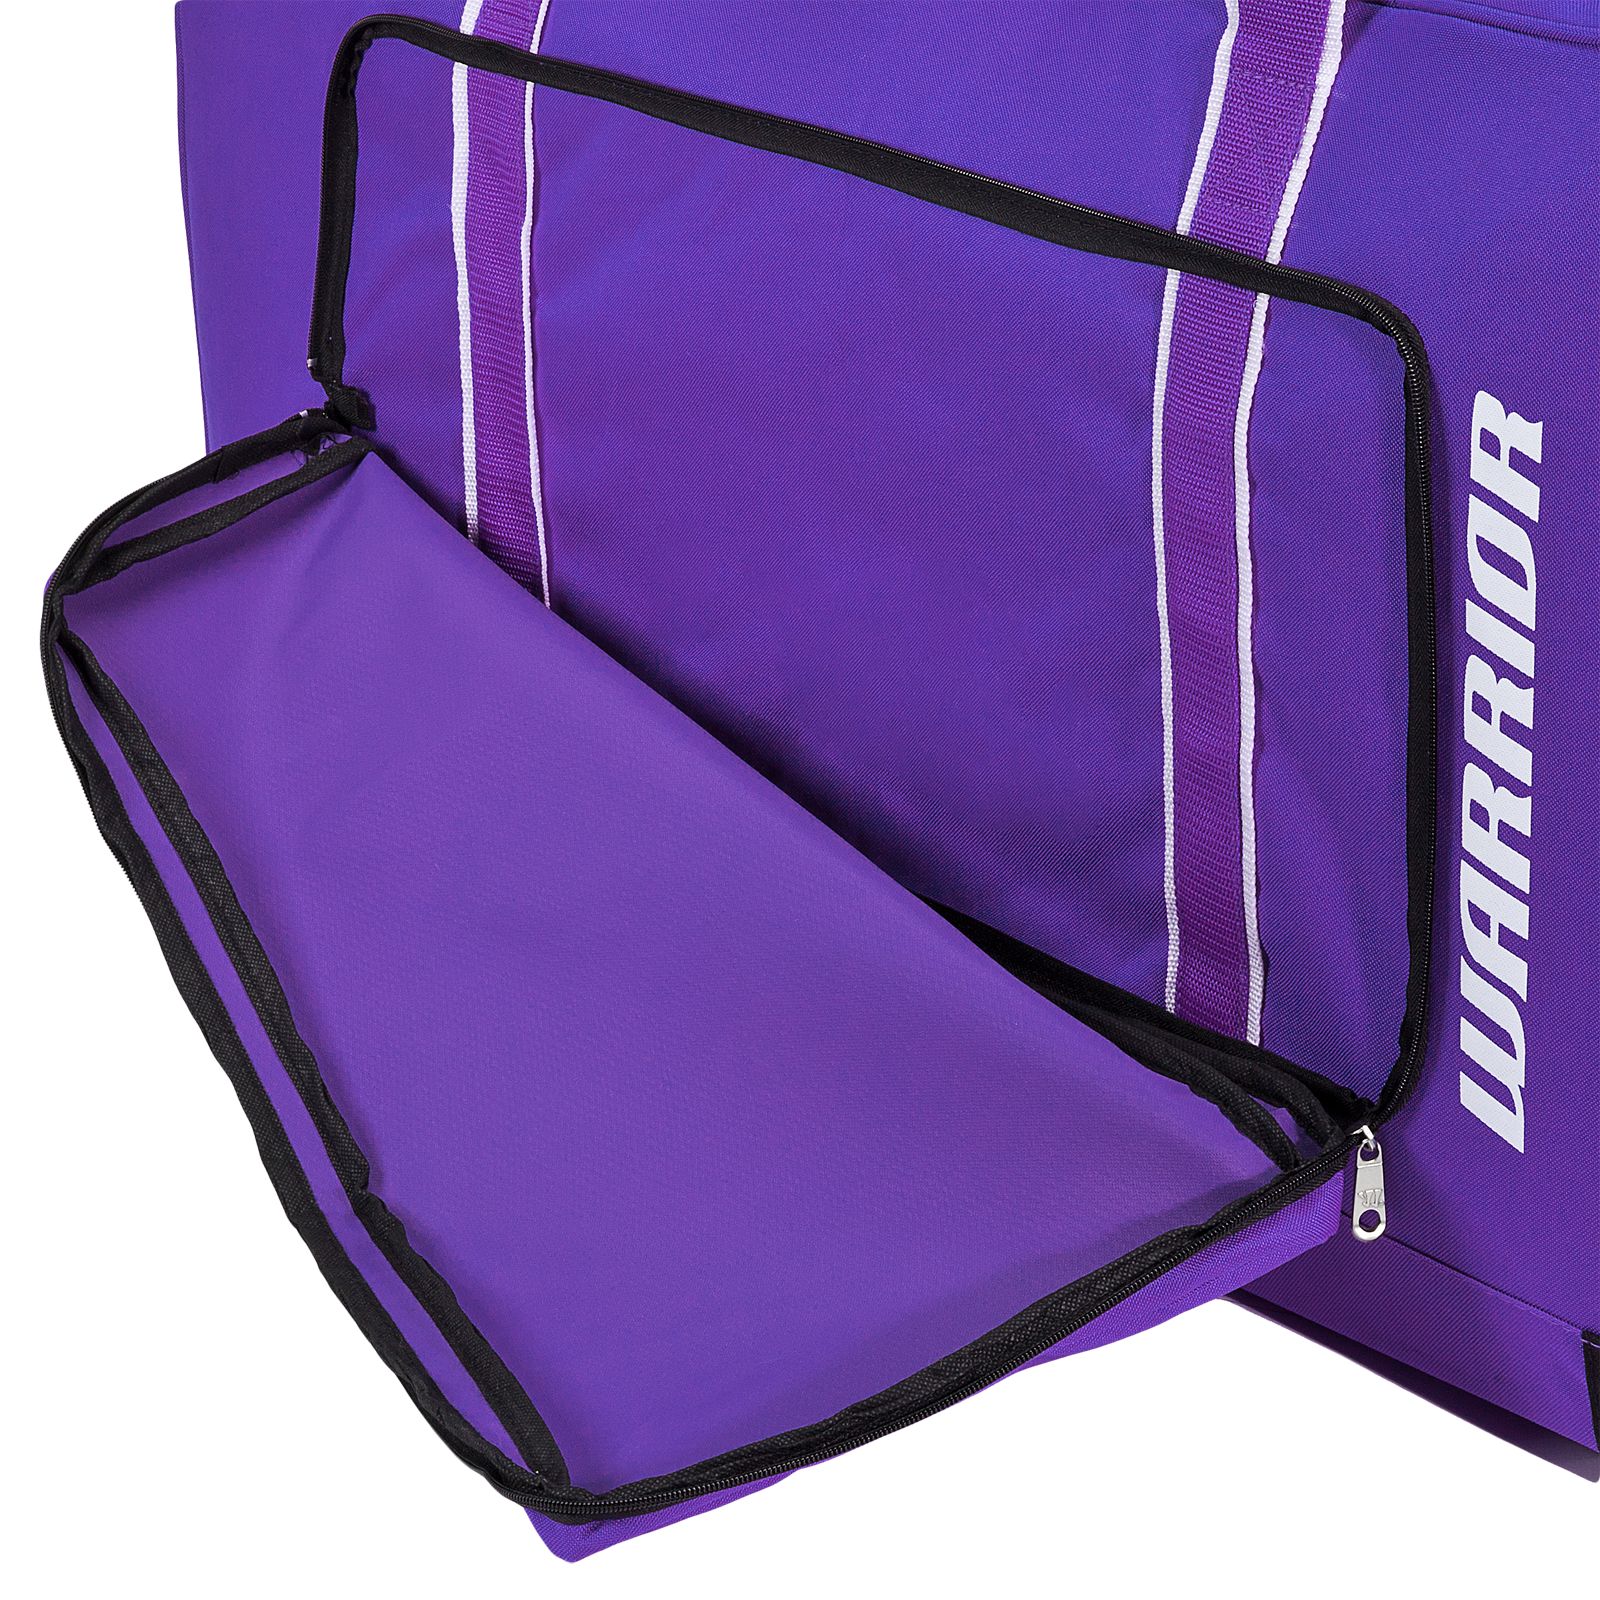 Team Goalie Duffel Bag, Purple with White image number 3